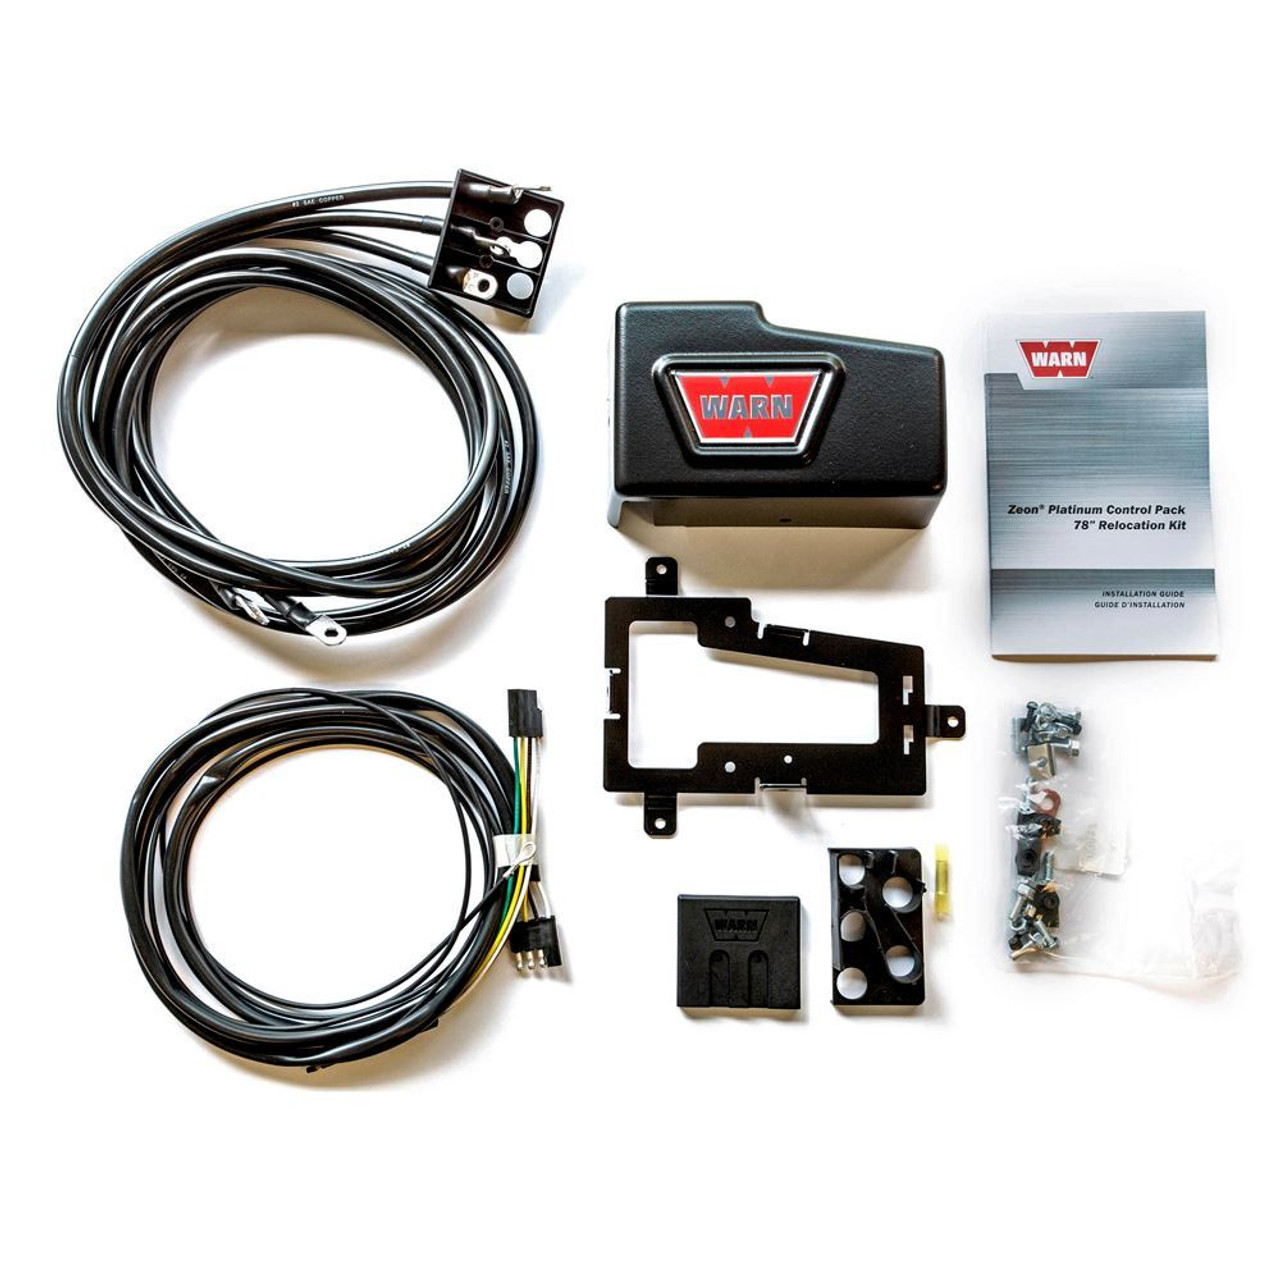 WARN Long Control Pack Relocation Kit 92193